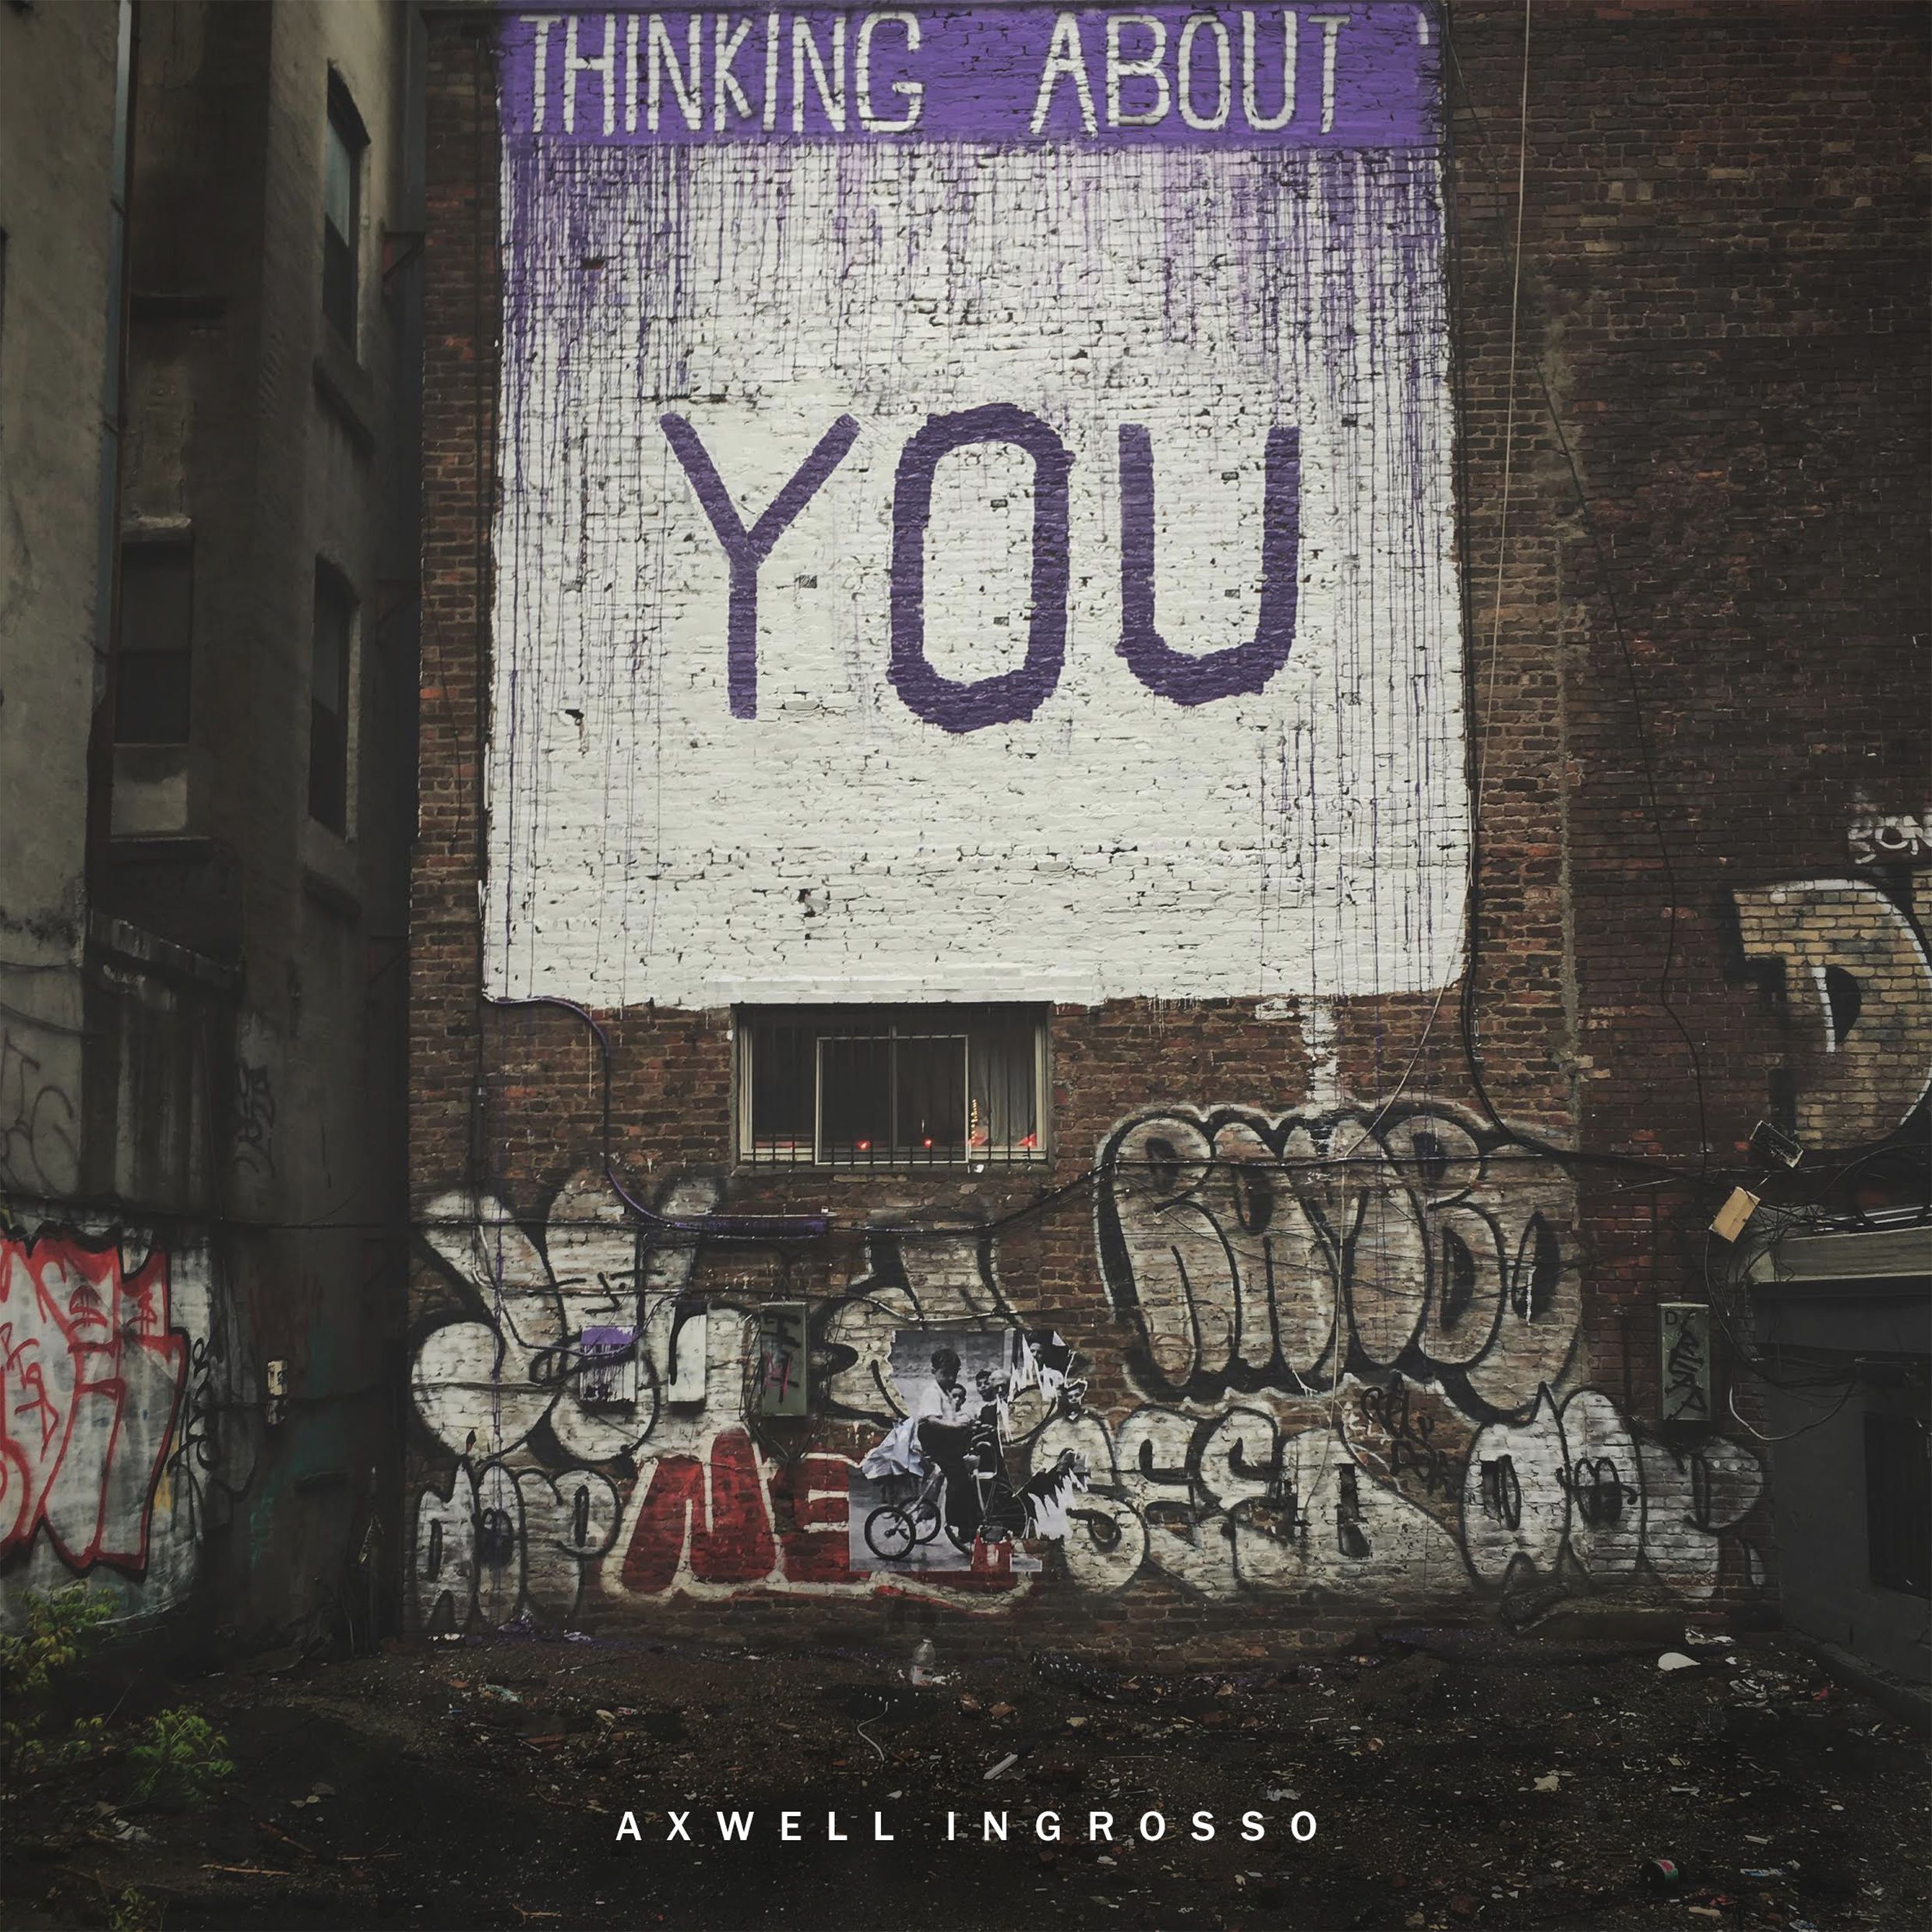 axwell-l-ingrosso-thinking-about-you-2016-2480x2480.jpg